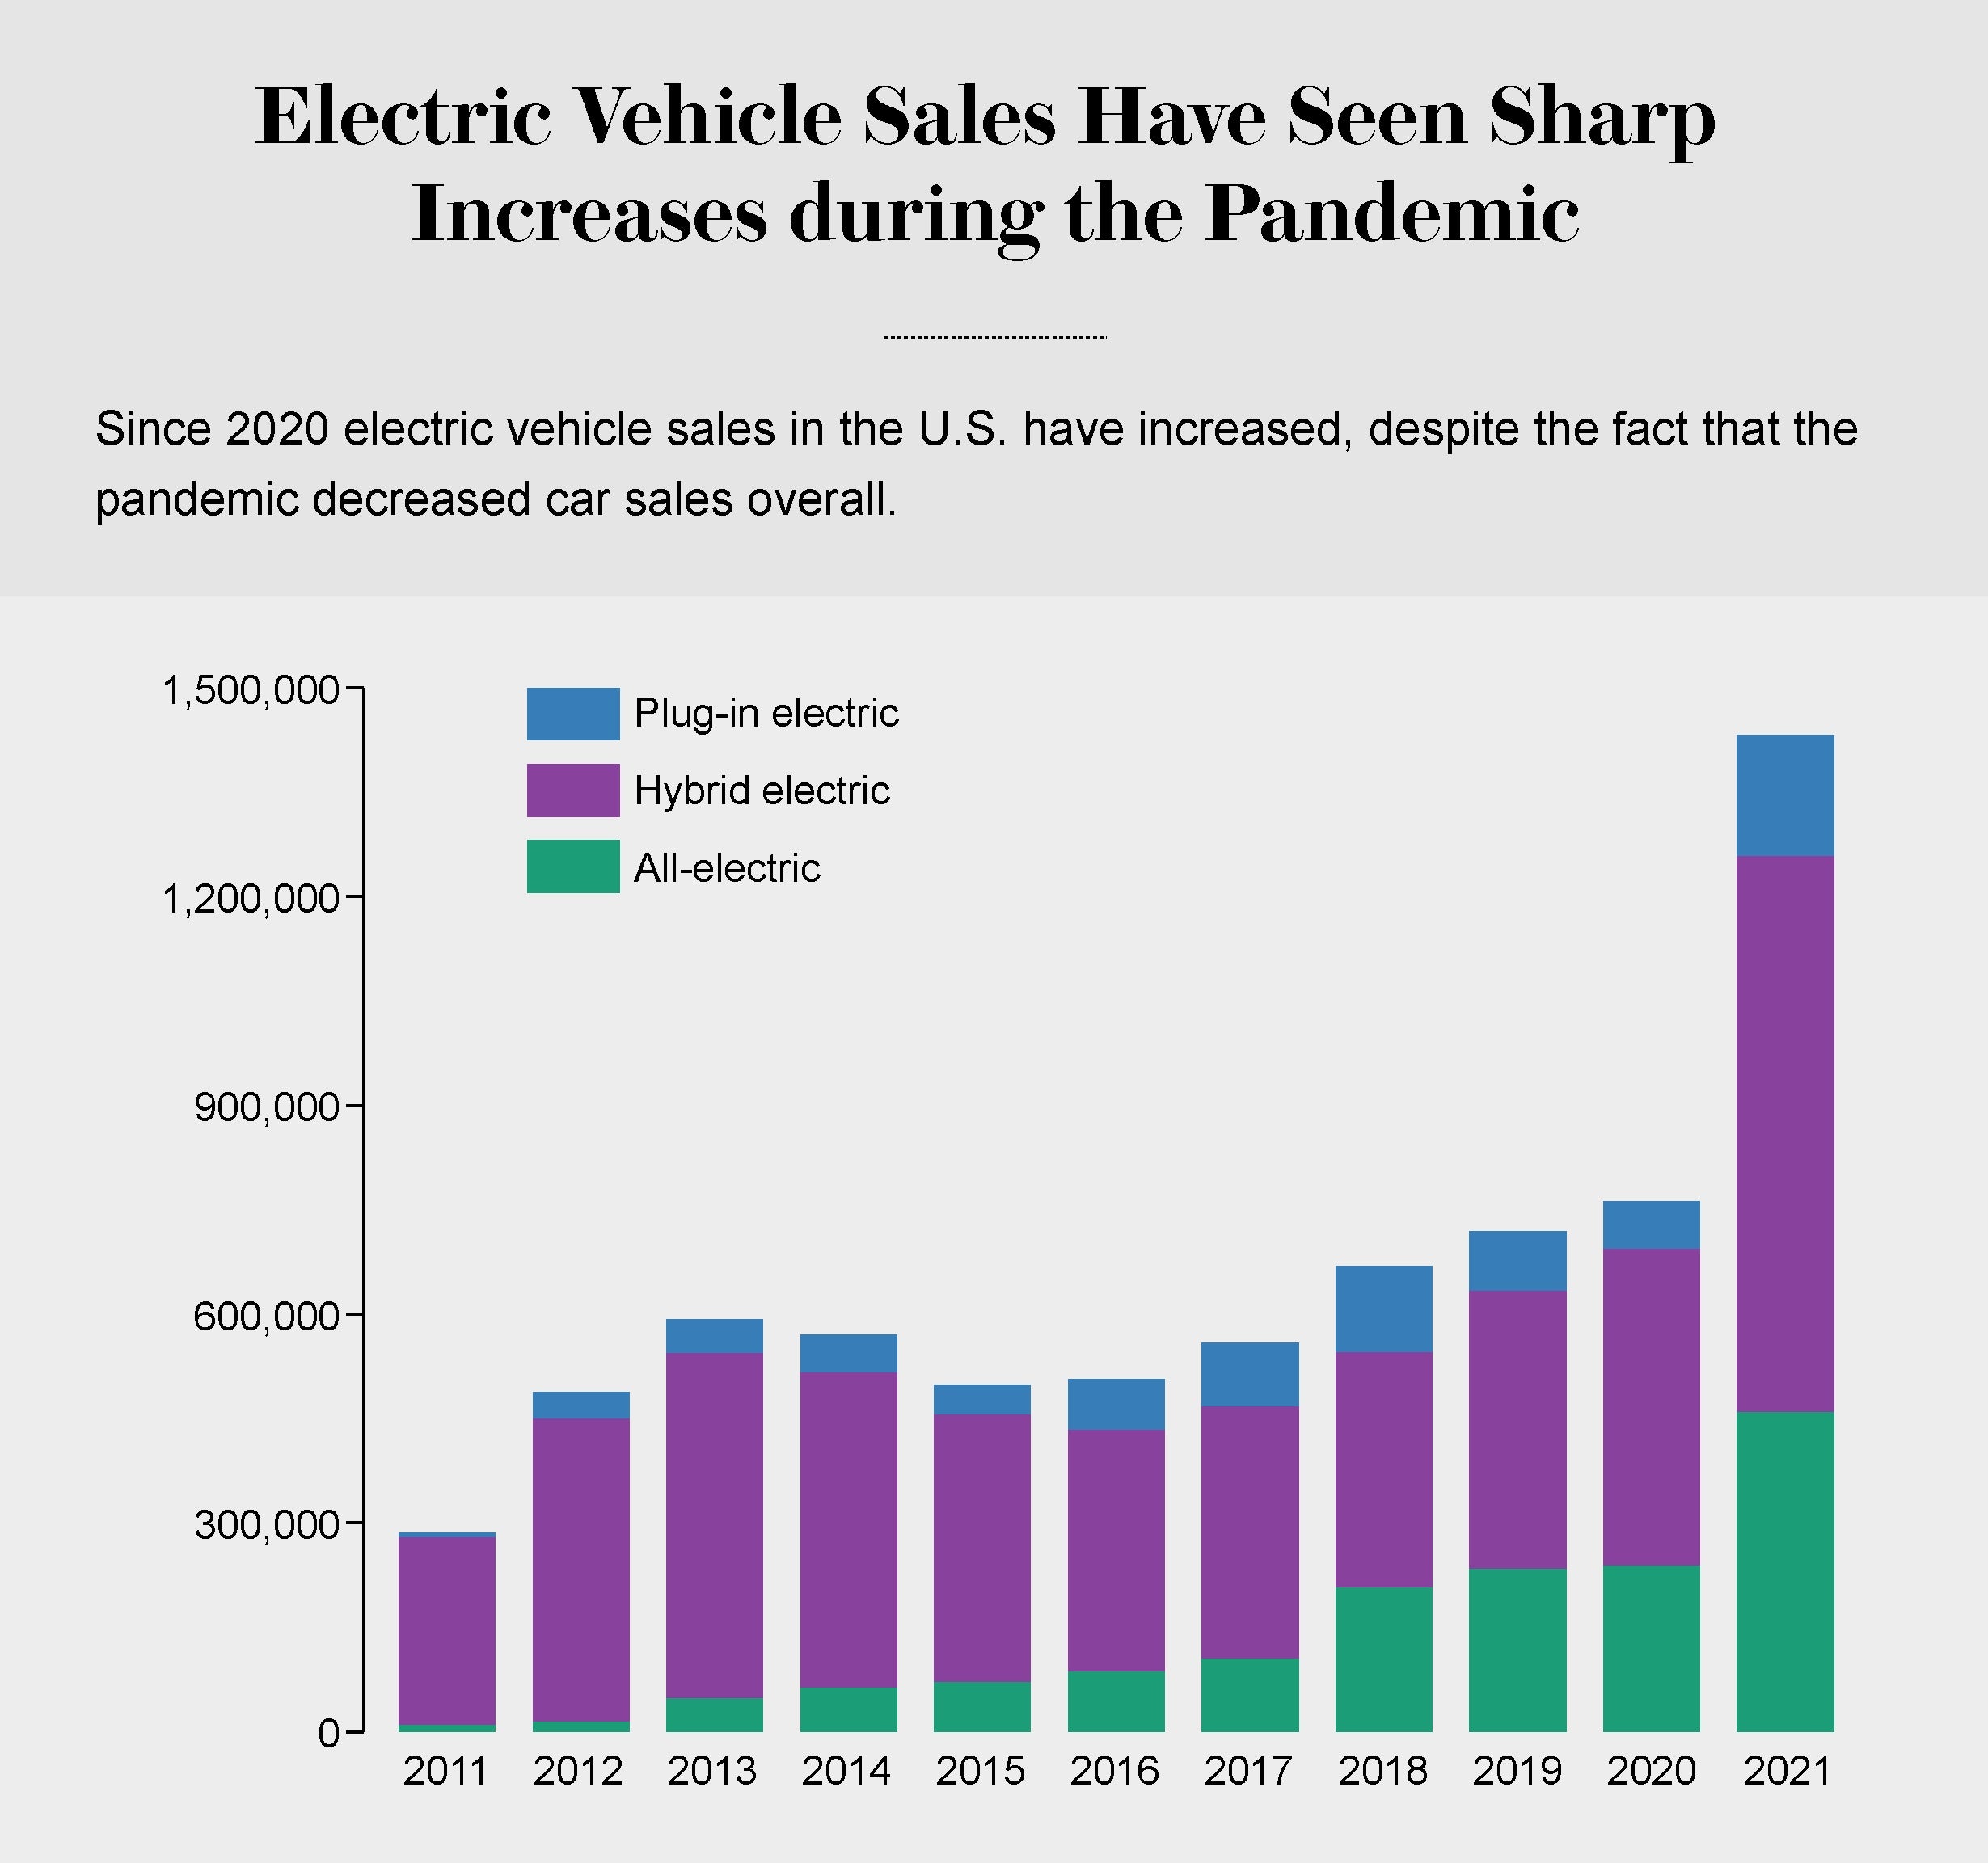 Chart shows the number of all-electric, hybrid electric and plug-in electric vehicles sold in the U.S. each year from 2011 to 2021, with 2021 having the highest sales of each type of car.